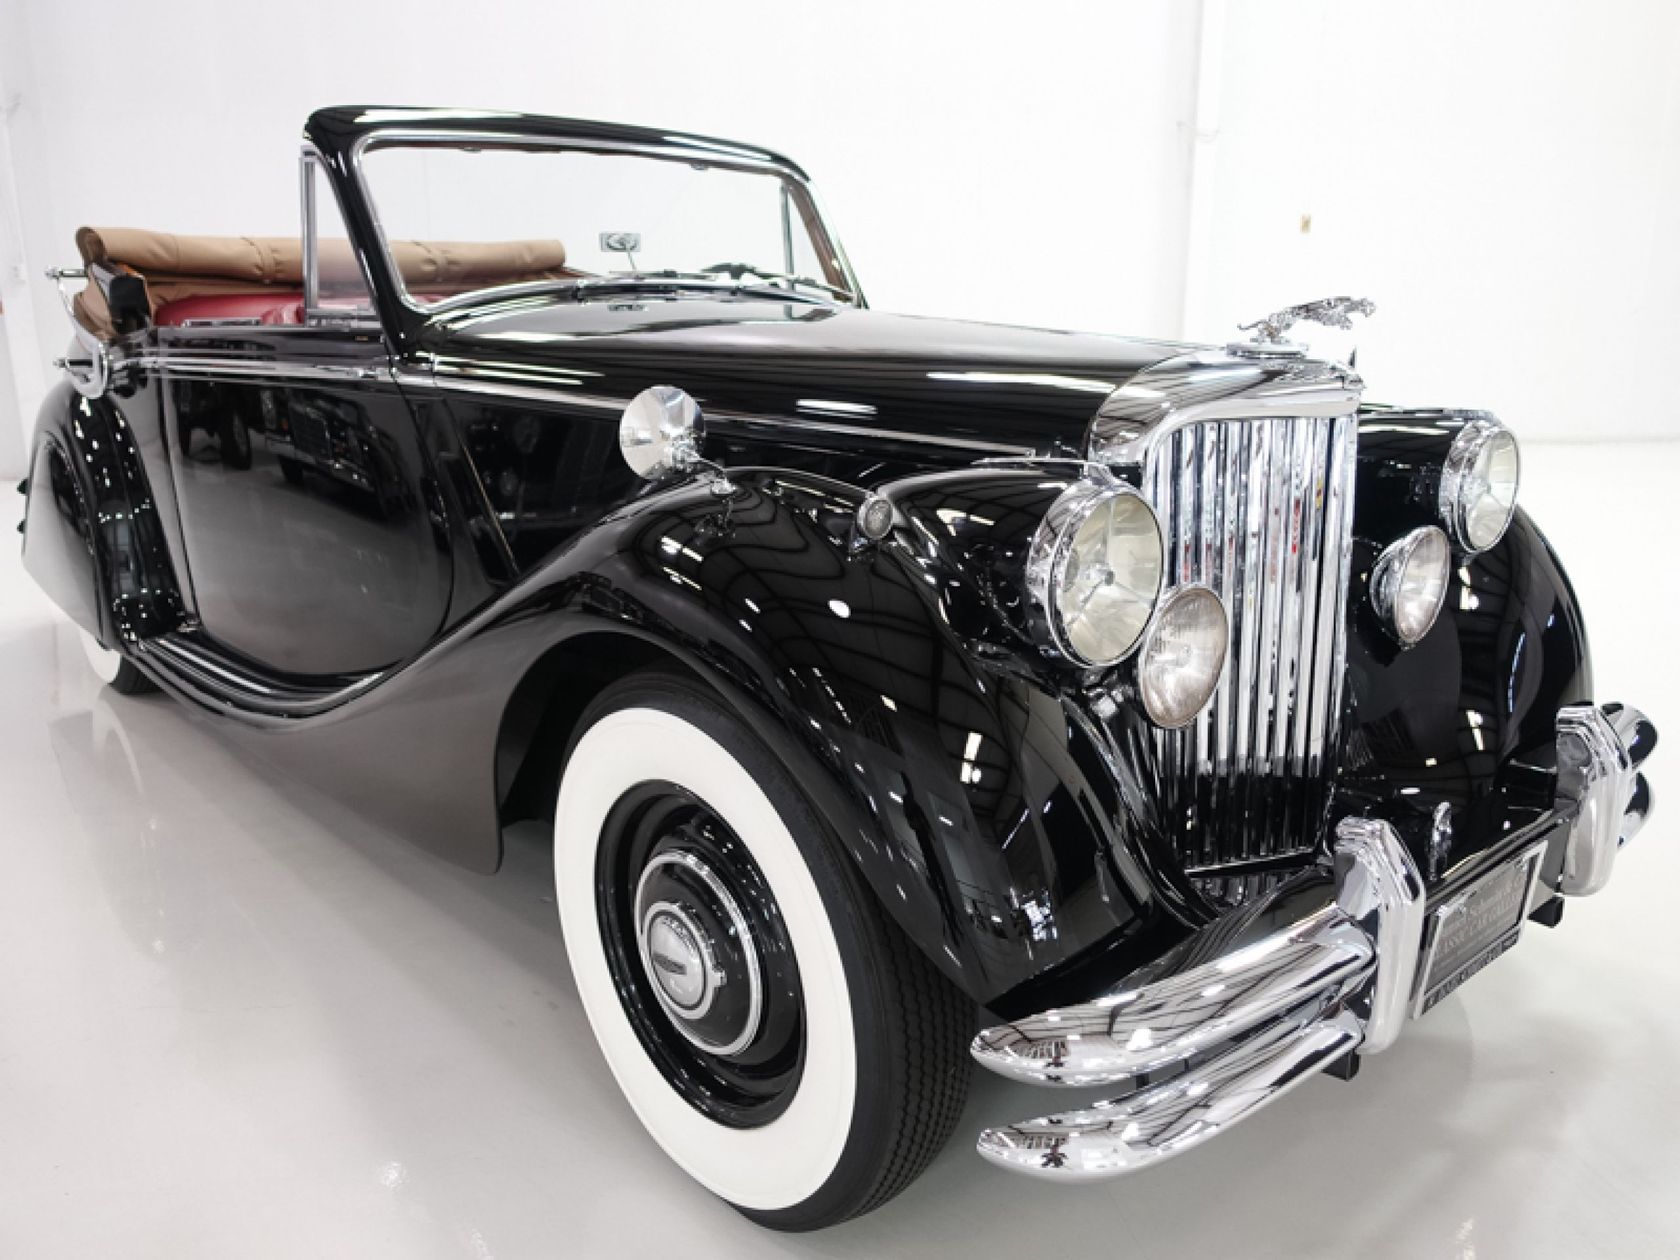 1951 Jaguar Mark V Drophead Coupe for sale on Luxify